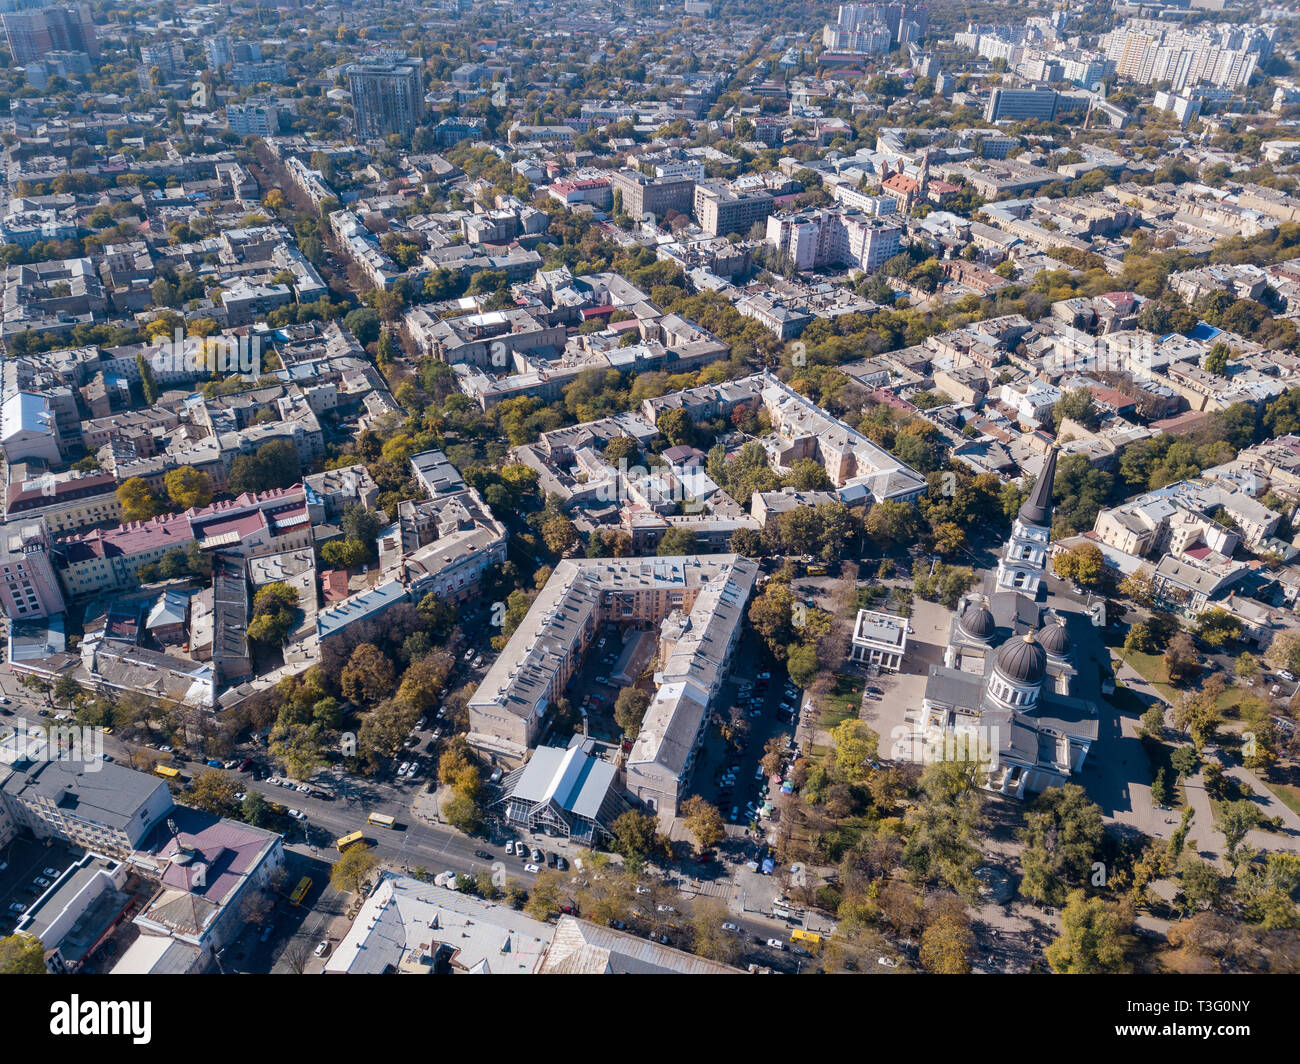 View on Spaso-Preobrazhensky Cathedral, the flower gallery of the house and the road with cars. Ukraine, Odessa. Aerial view from the drone. Stock Photo